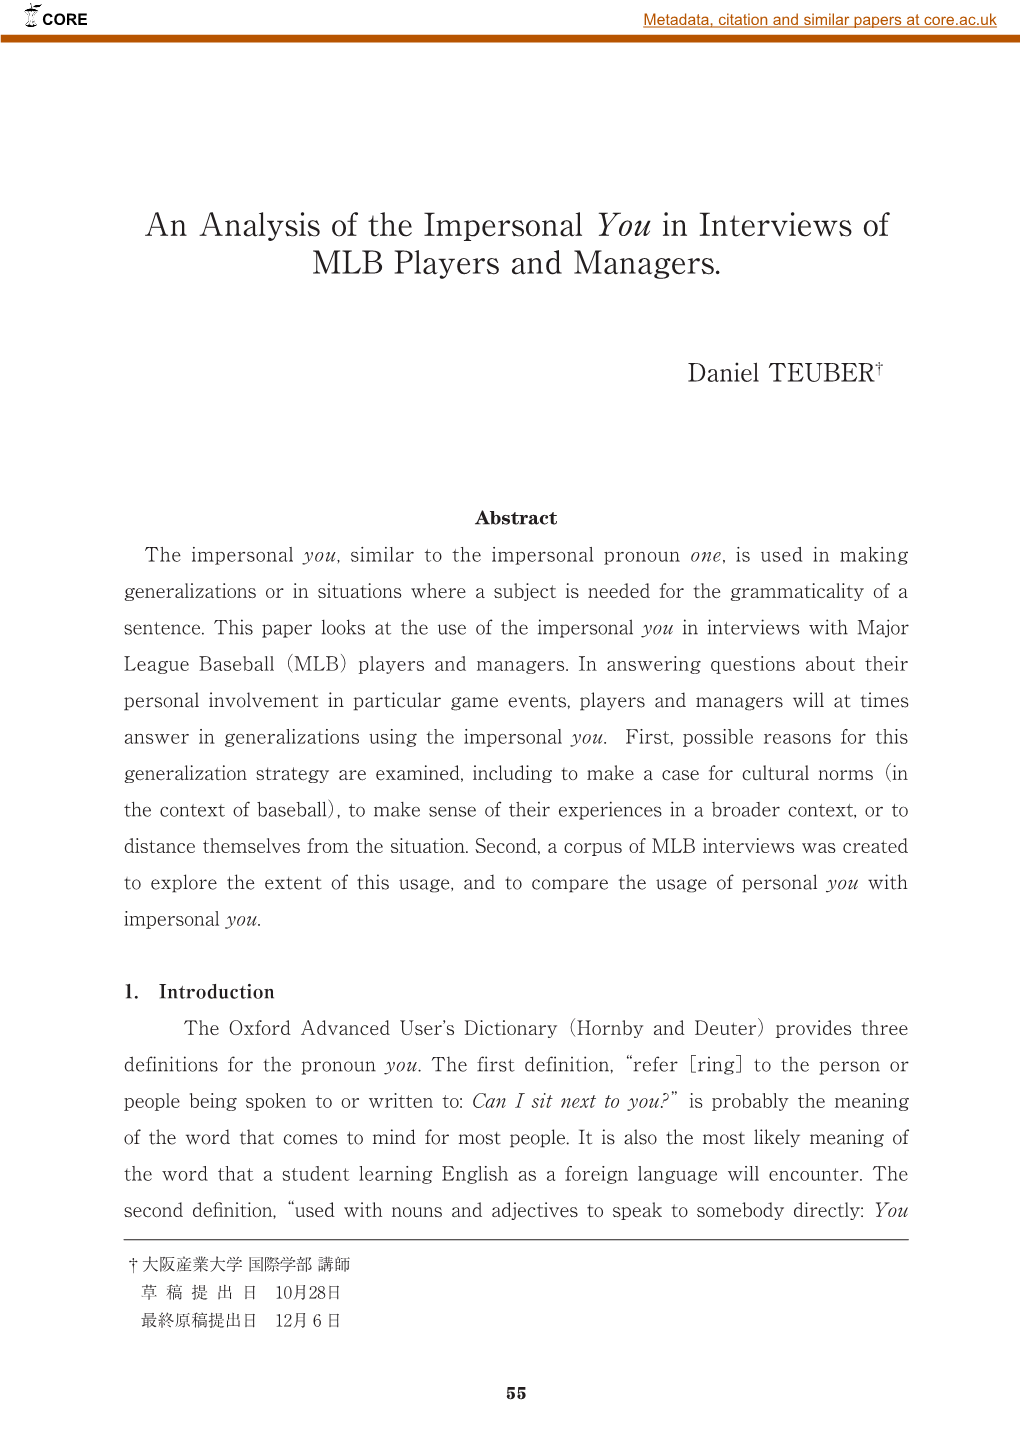 An Analysis of the Impersonal You in Interviews of MLB Players and Managers